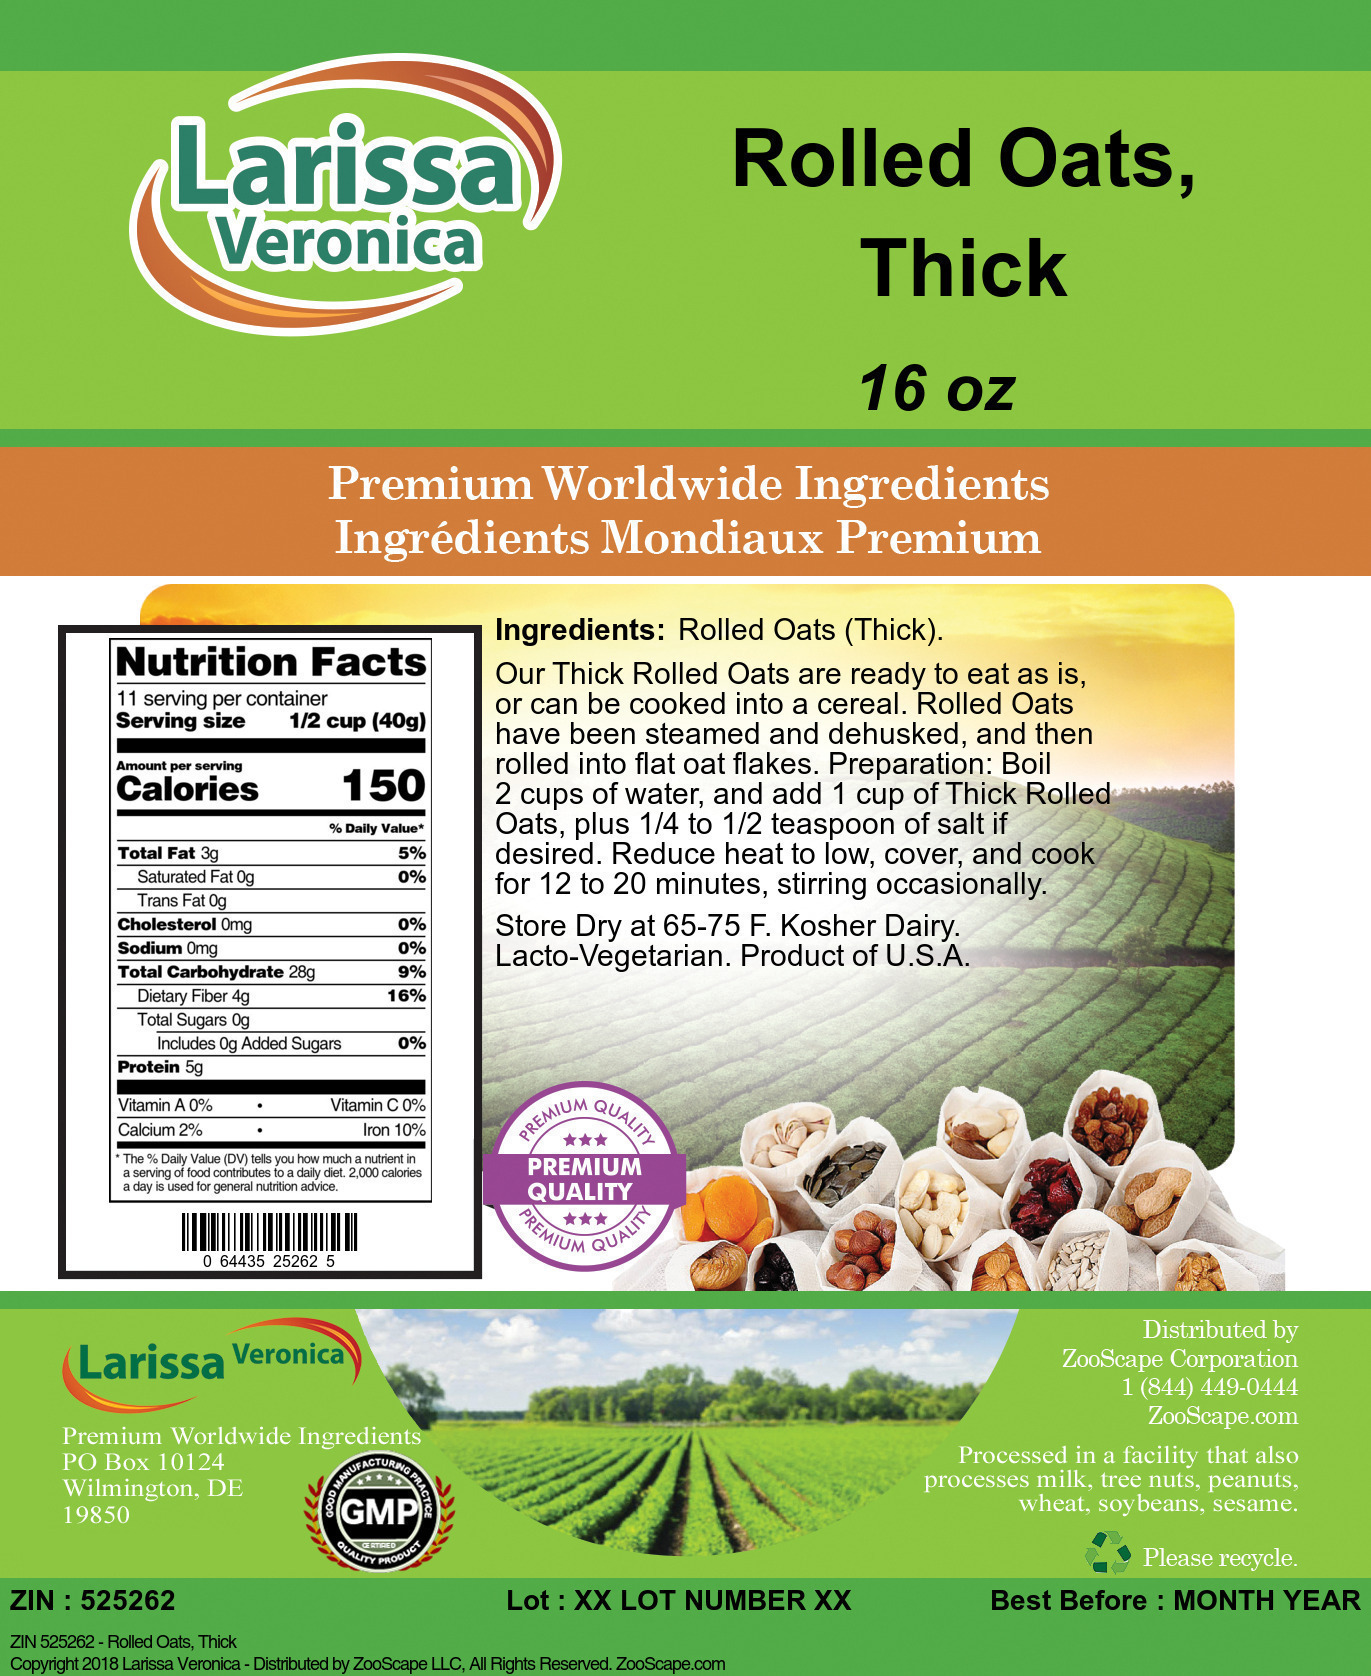 Rolled Oats, Thick - Label